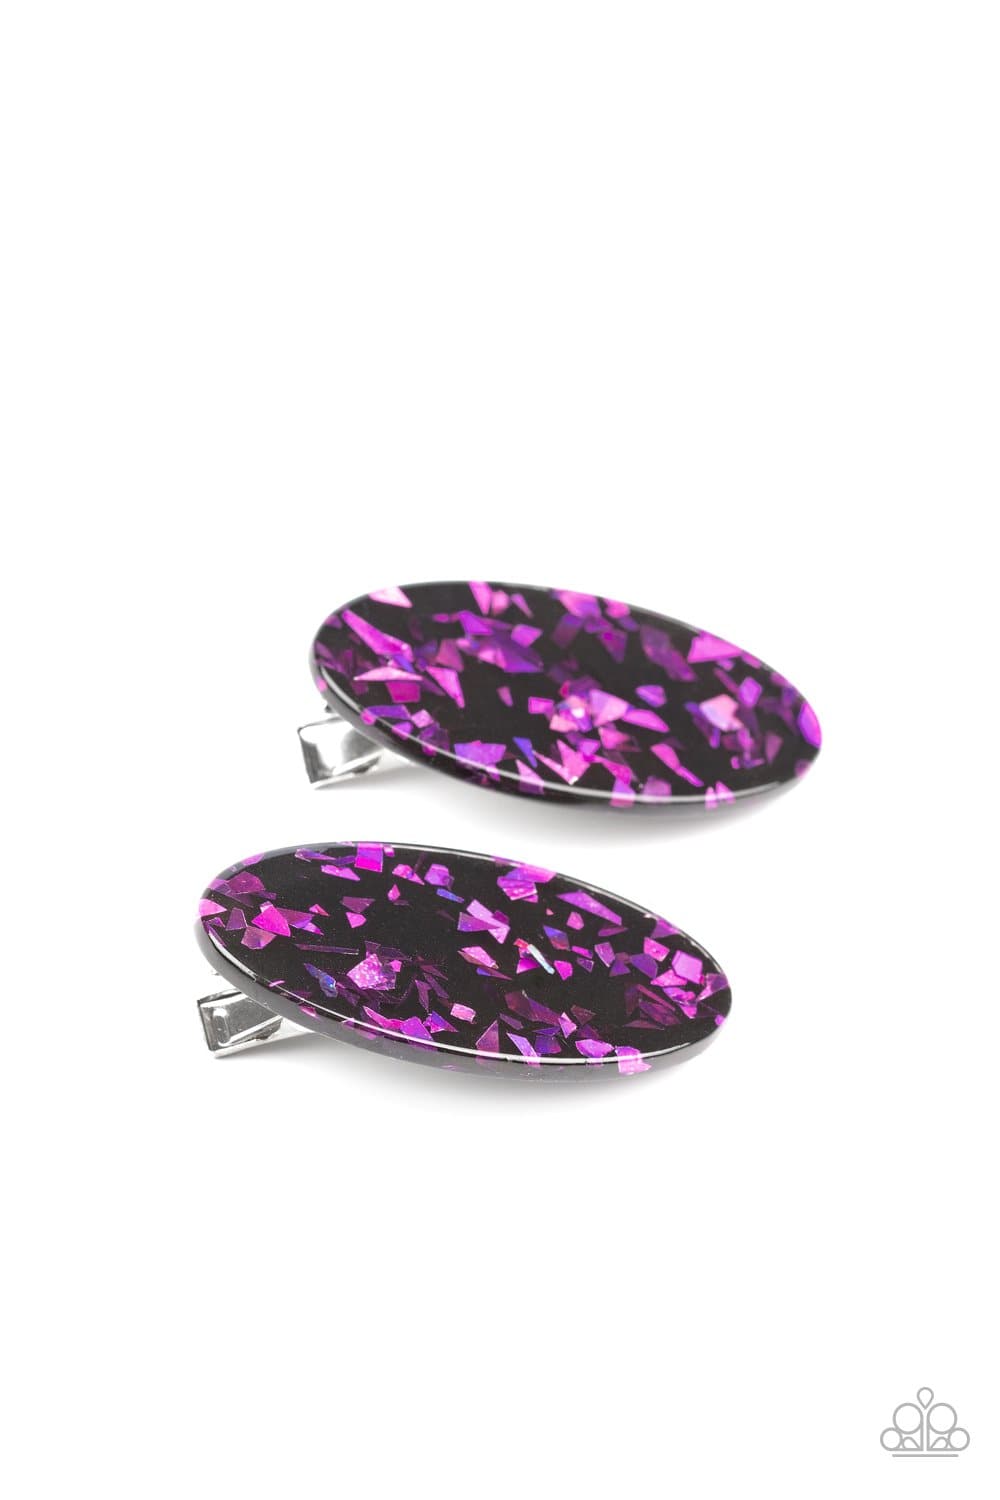 Paparazzi: Get OVAL Yourself! - Purple Hair Clips - Jewels N’ Thingz Boutique